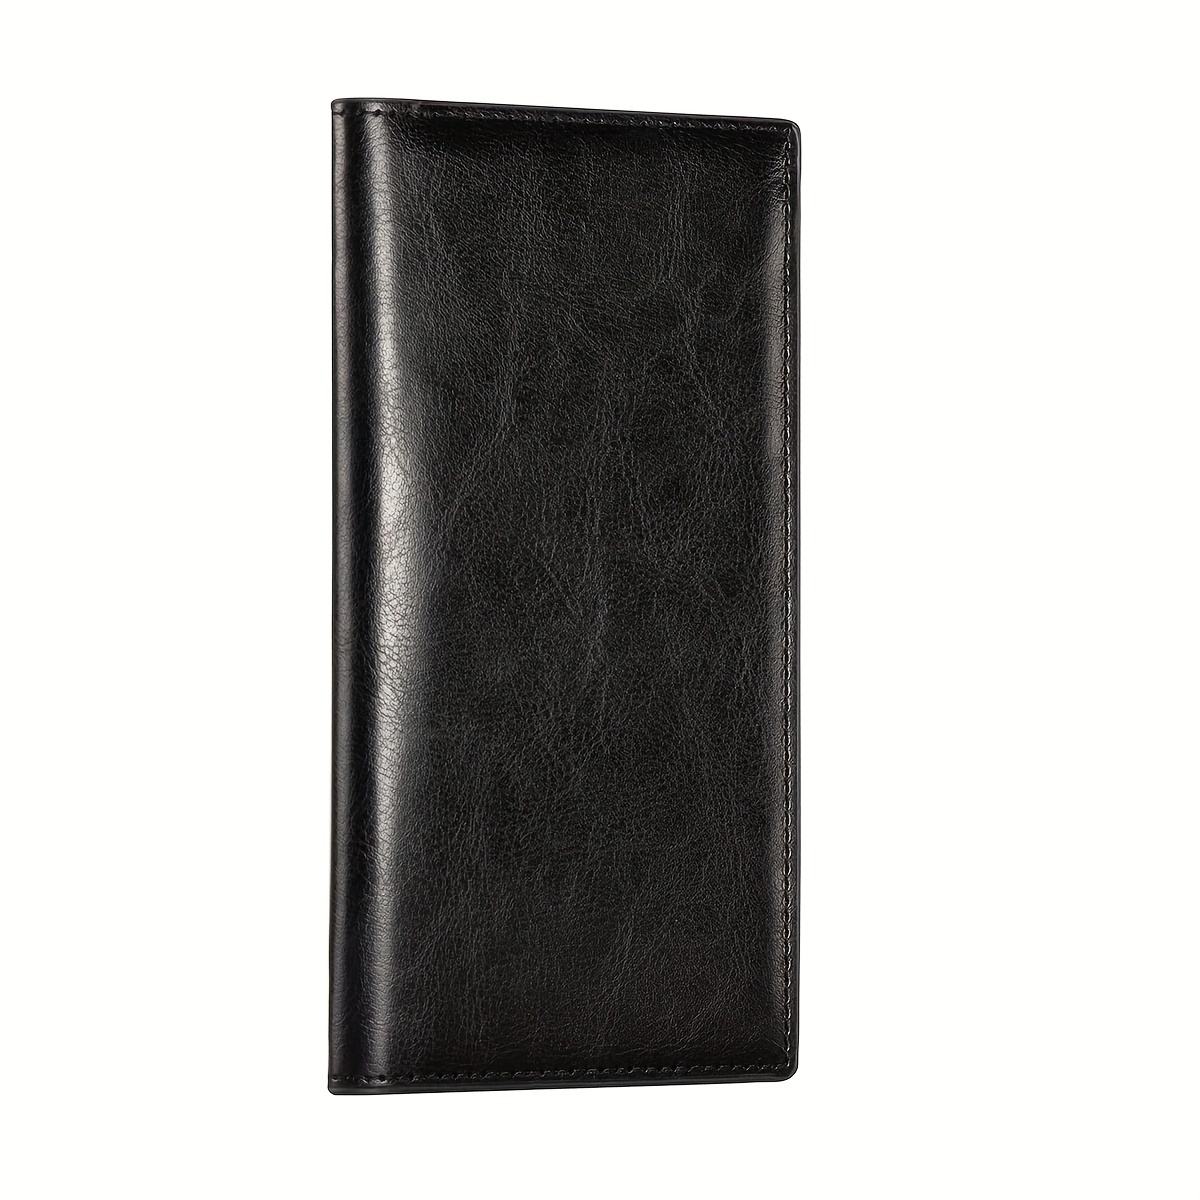 

Premium Faux Leather Checkbook Cover - Rfid Blocking, Classic Design, Slim & Durable - Perfect For Personal & Business Checks